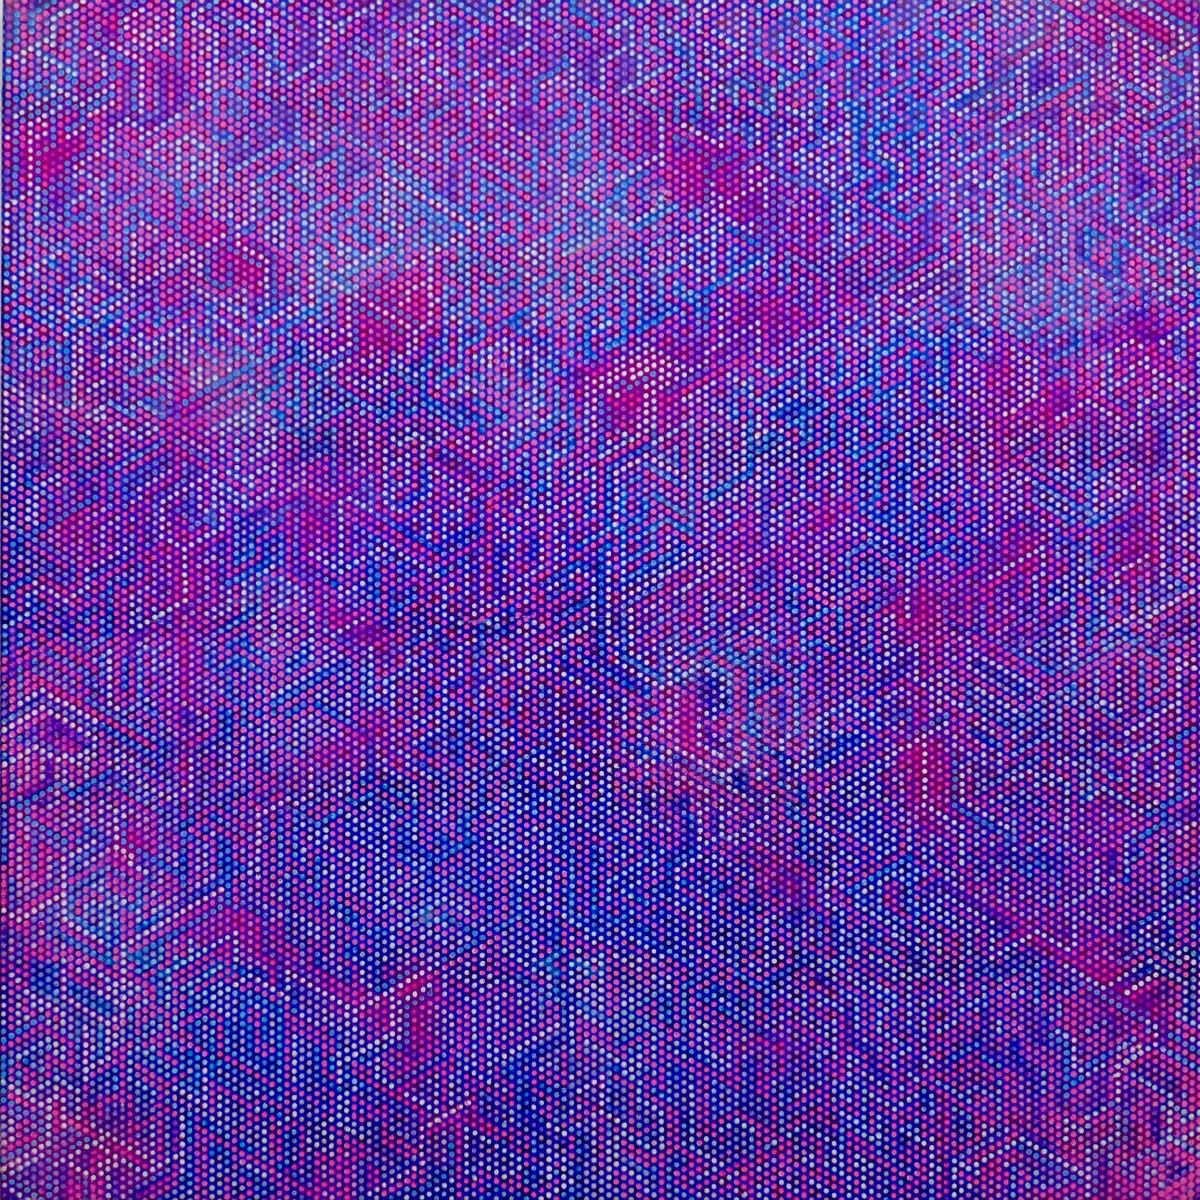 Synthesis Violet Blue, 2016 by Colin McCallum